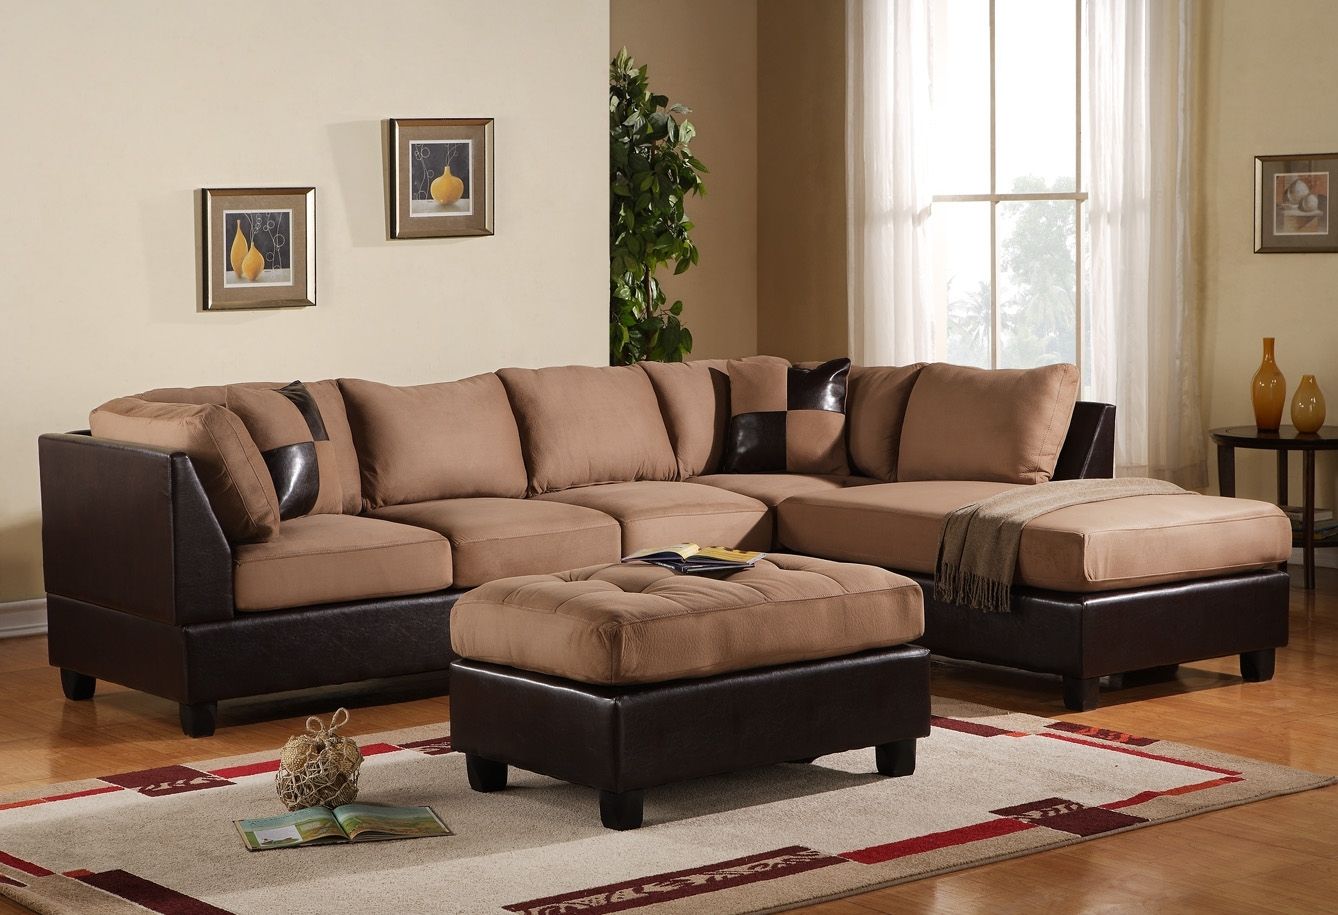 Furniture: Rooms To Go Sectional Sofa Cleanupflorida Com With Regard To Sectional Sofas At Rooms To Go (View 1 of 15)